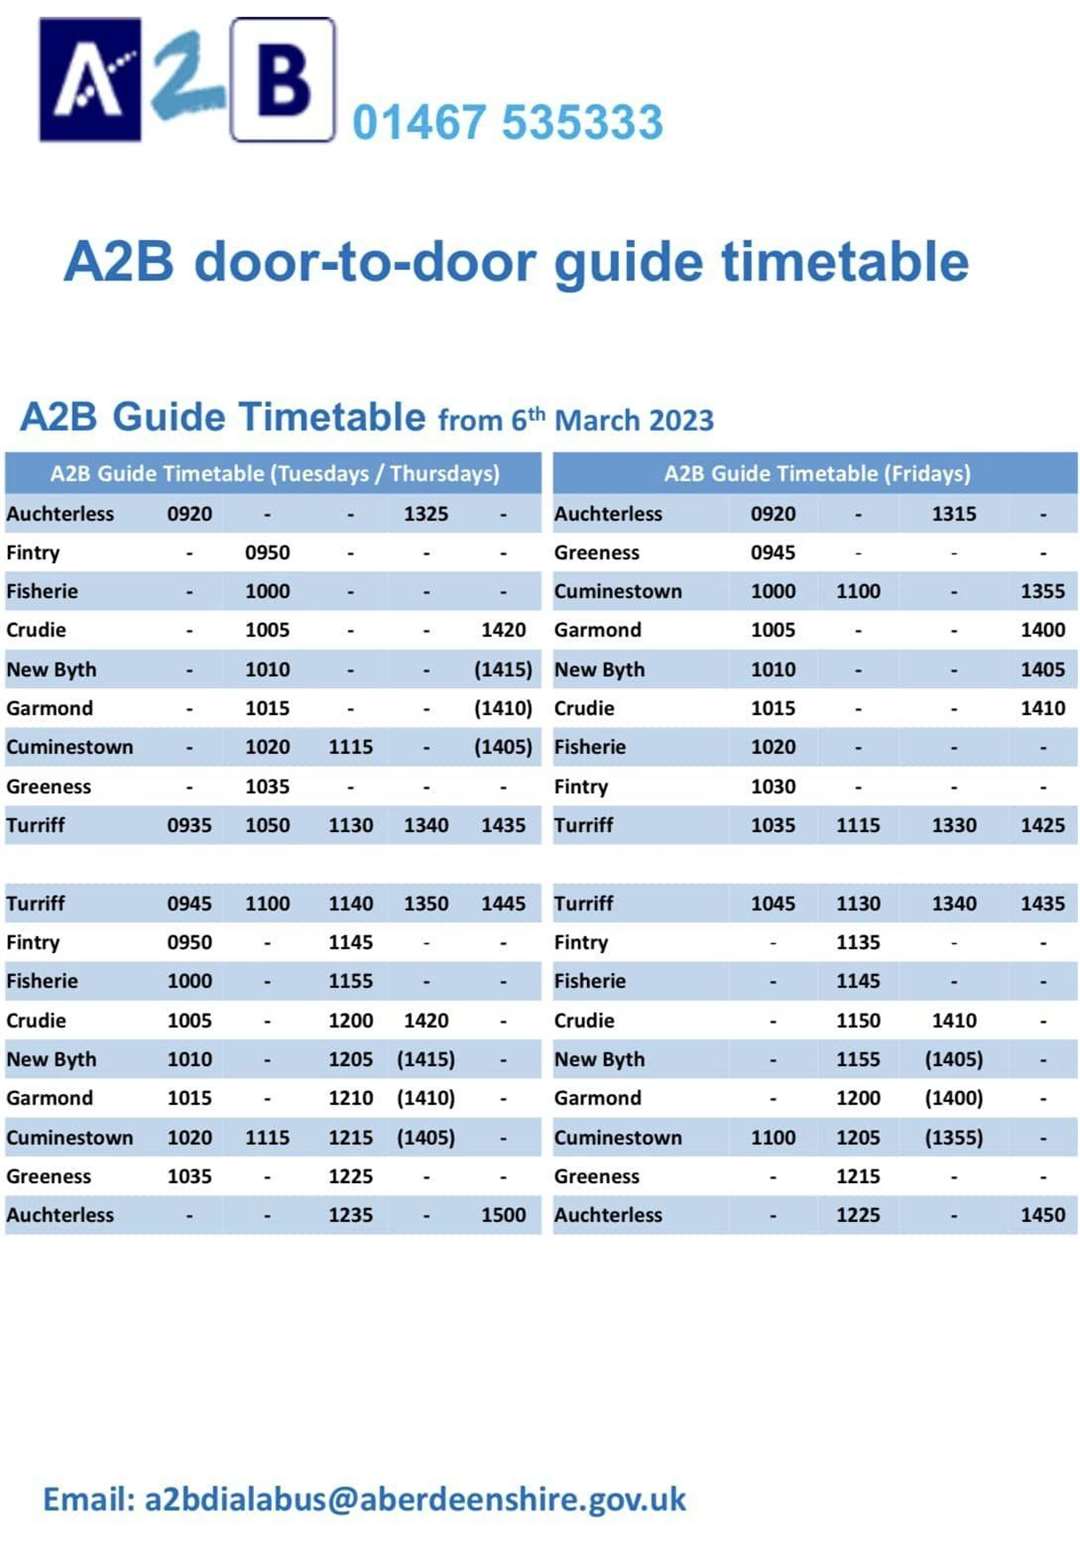 The A2B timetable